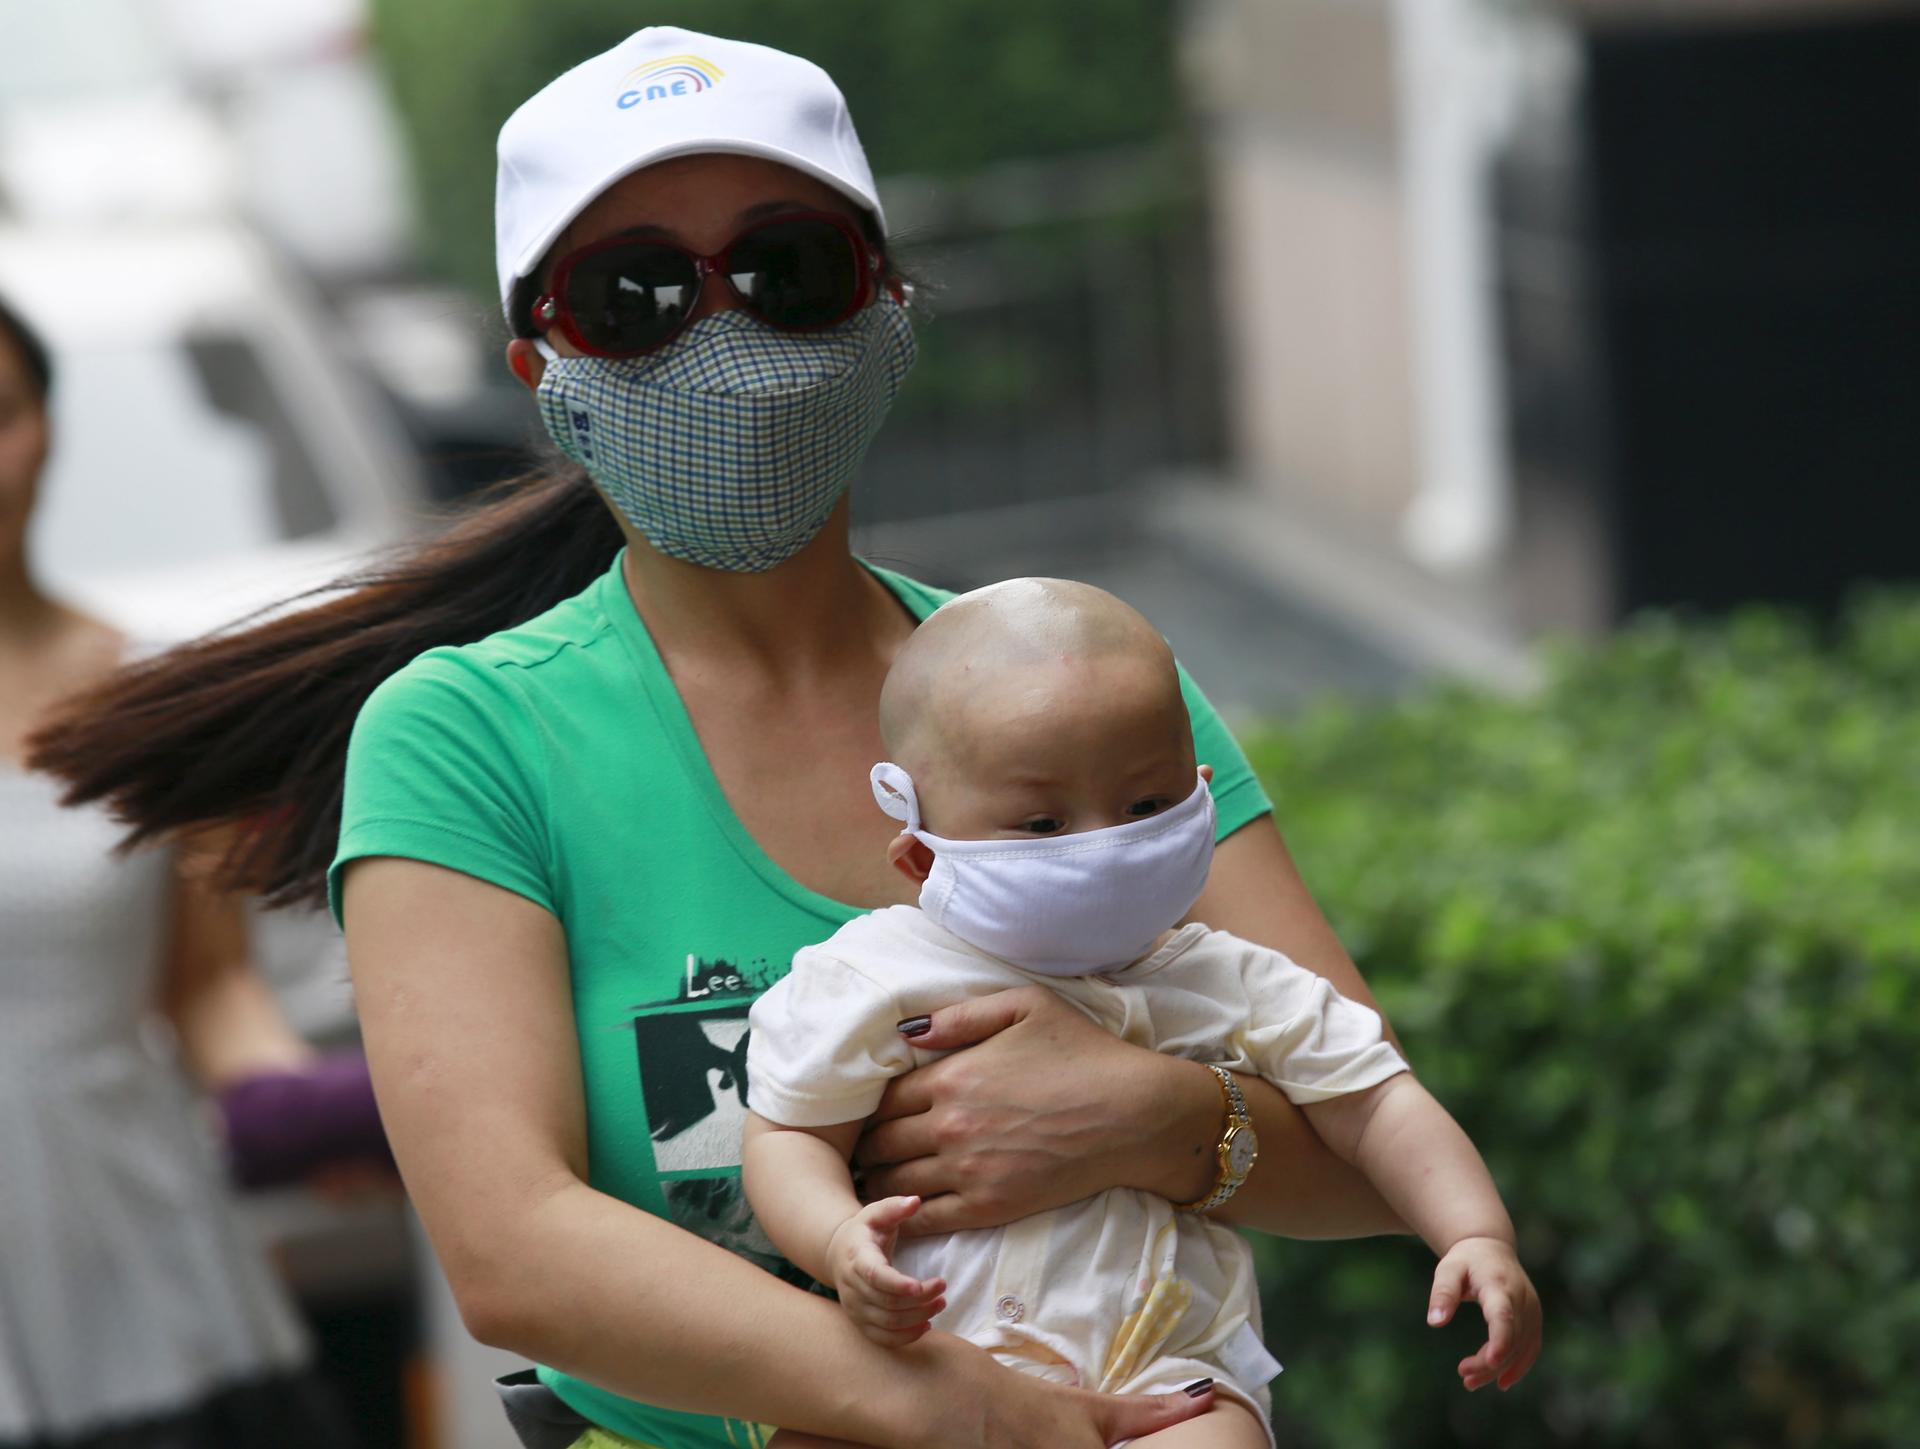 A woman carrying a baby, both wearing masks, make their way down a street and away from the site of explosions, in Tianjin, China.